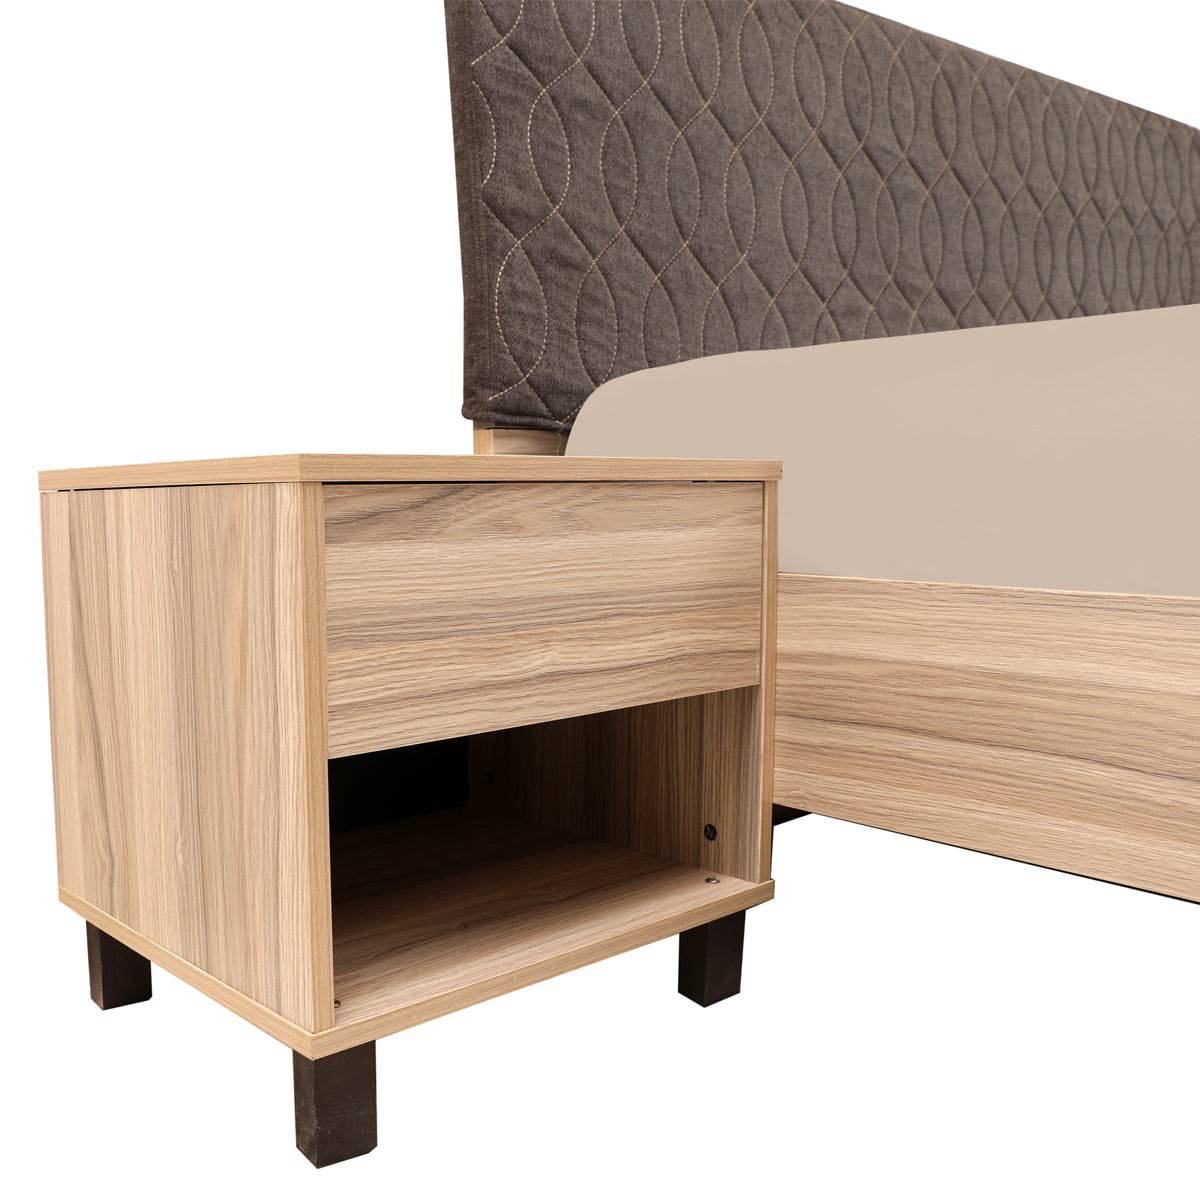 Cambridge Bed with Two Side Tables